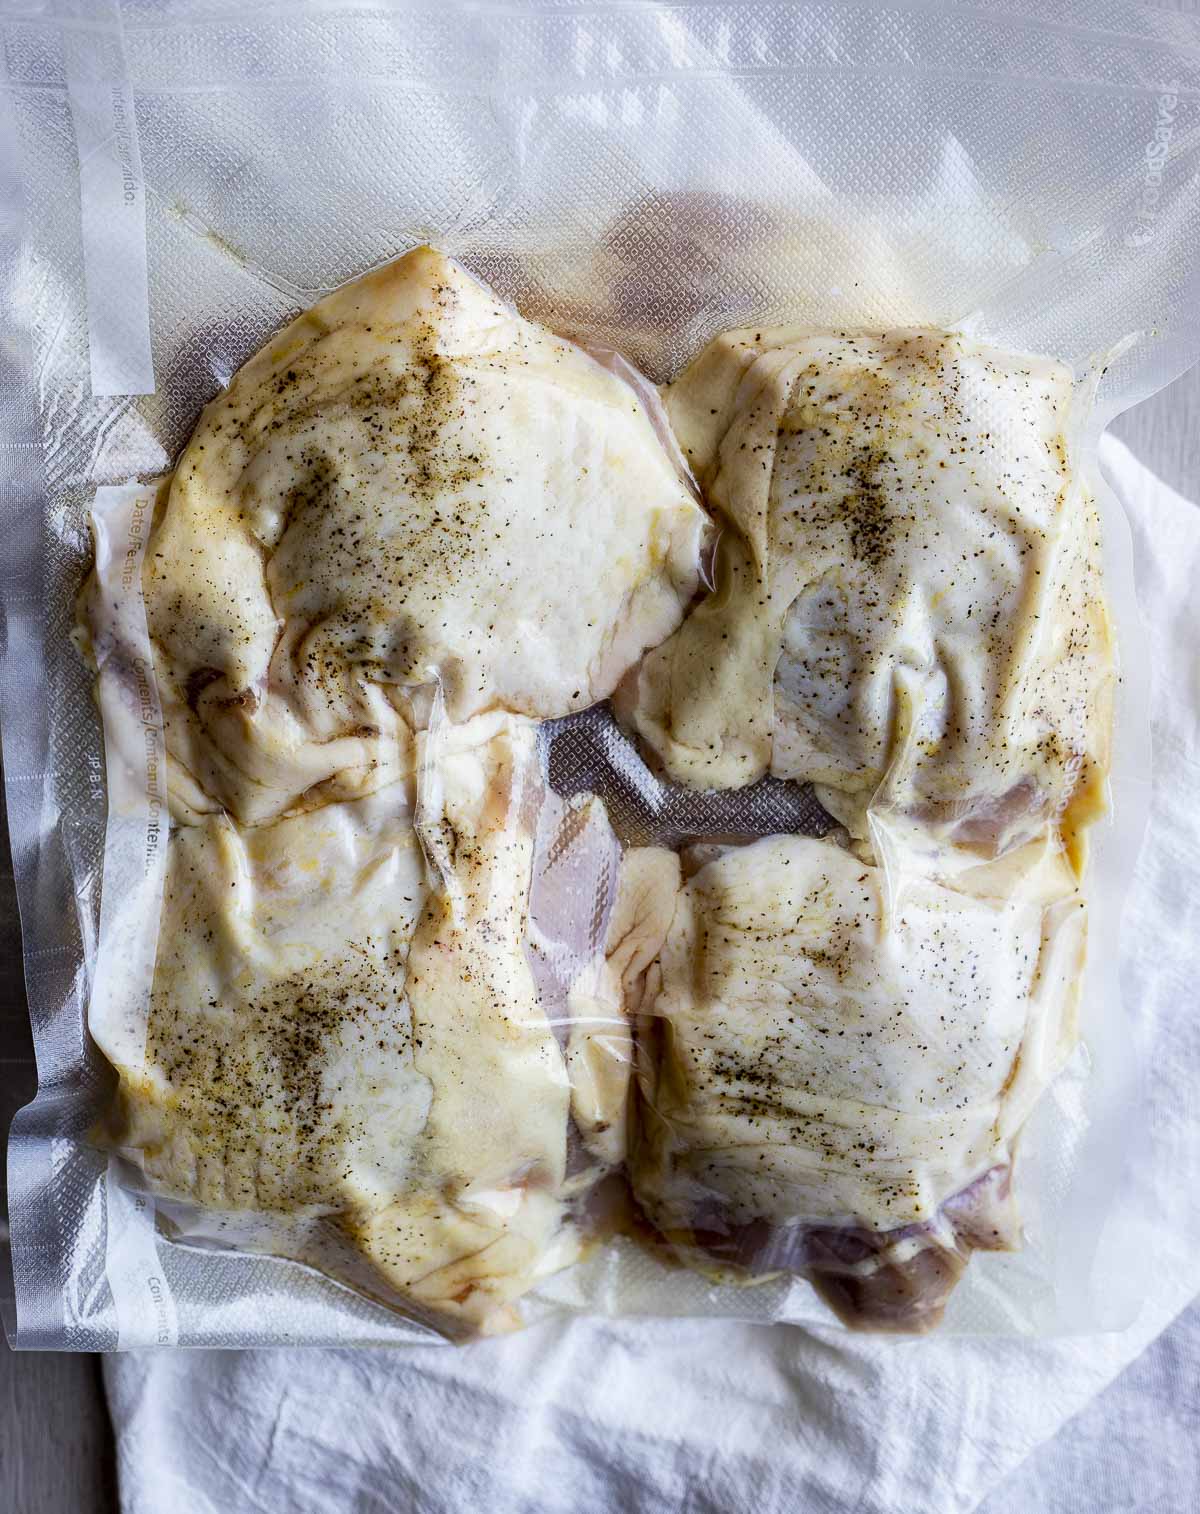 Chicken thighs vacuumed seal in a bag.